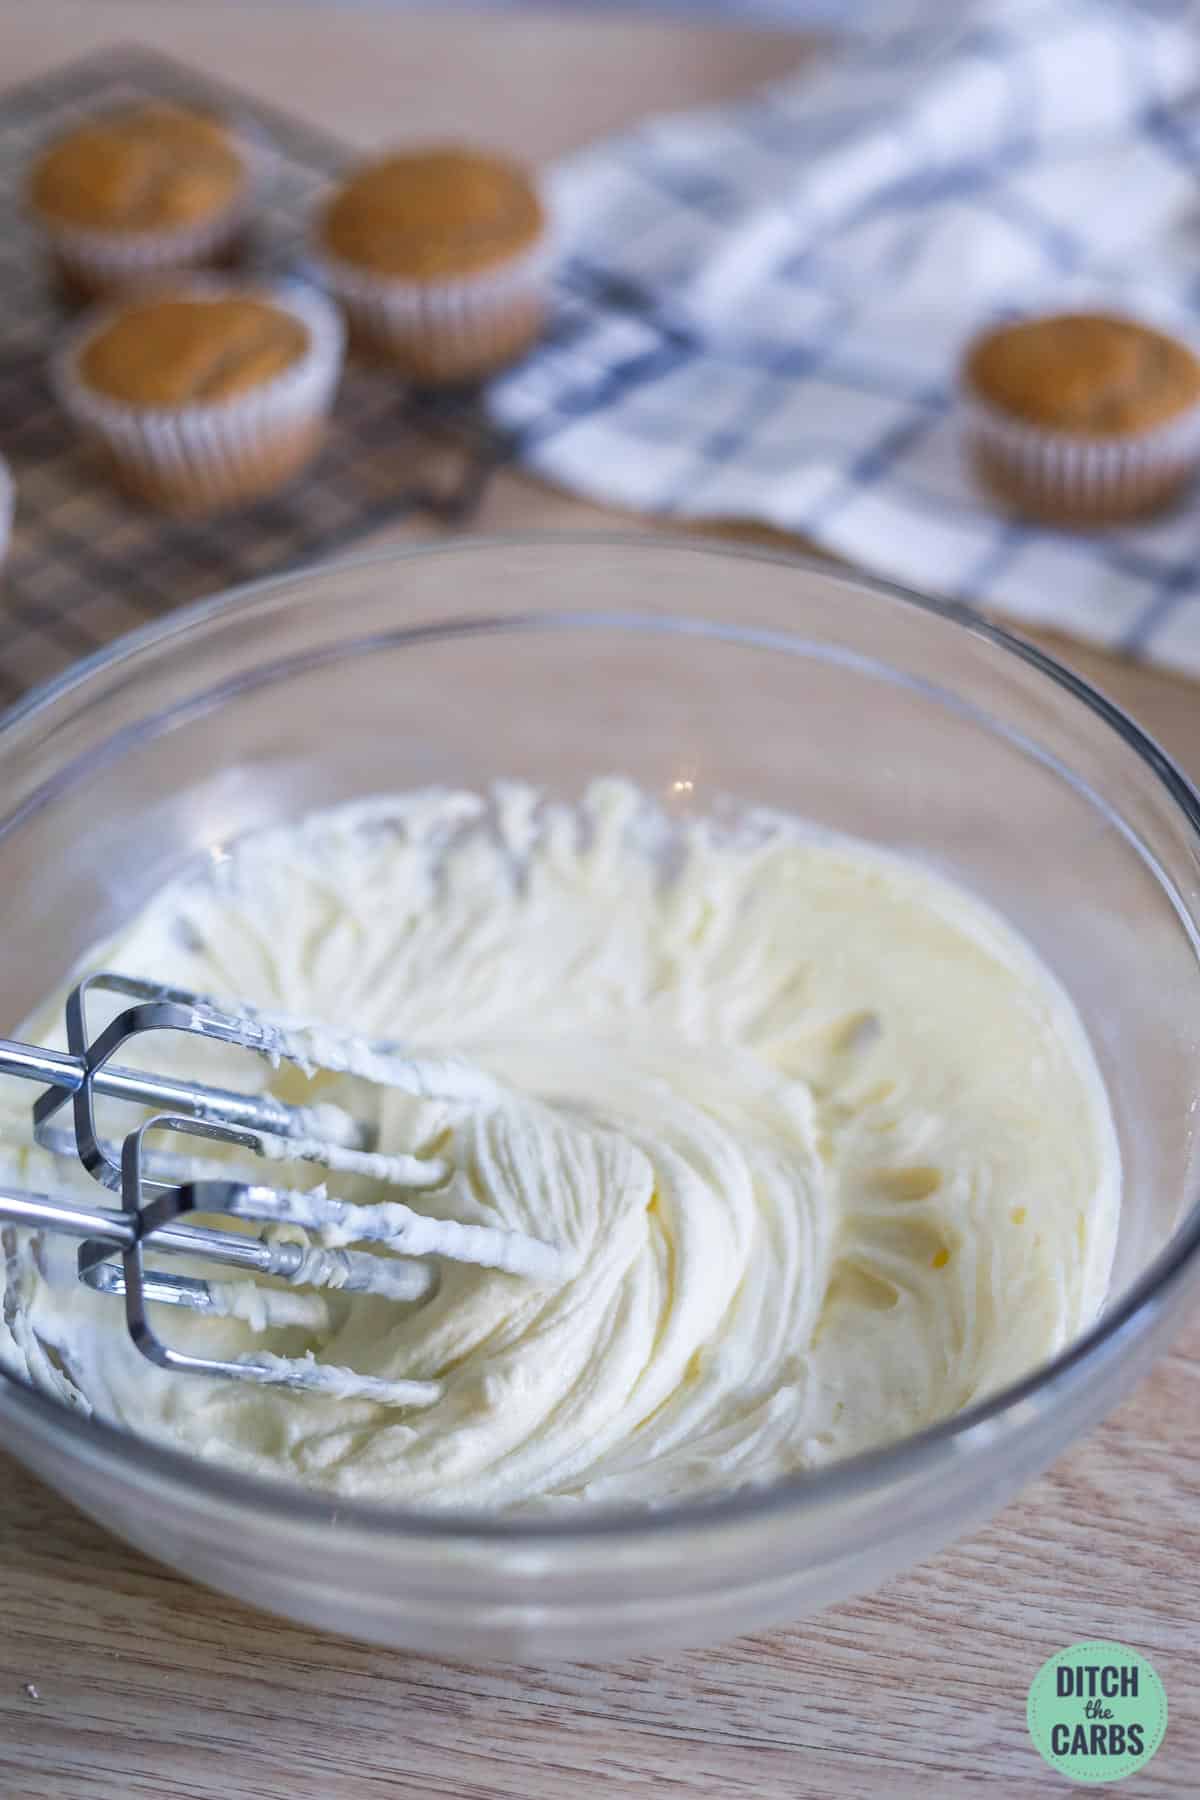 whisks and cream cheese frosting